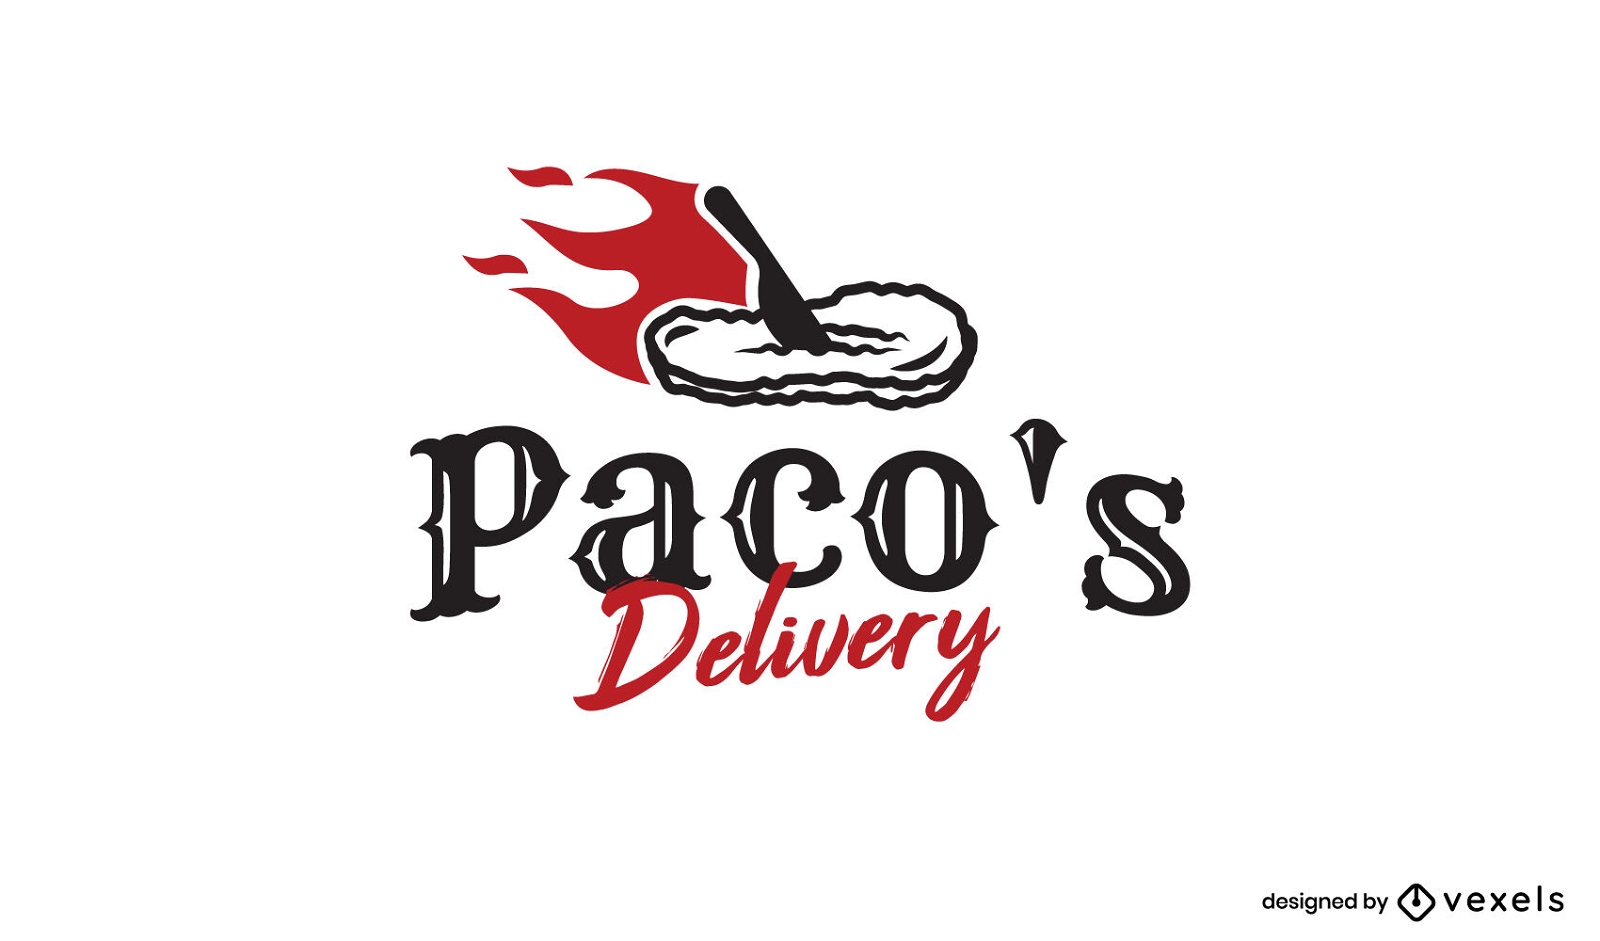 Pacos delivery food business logo template